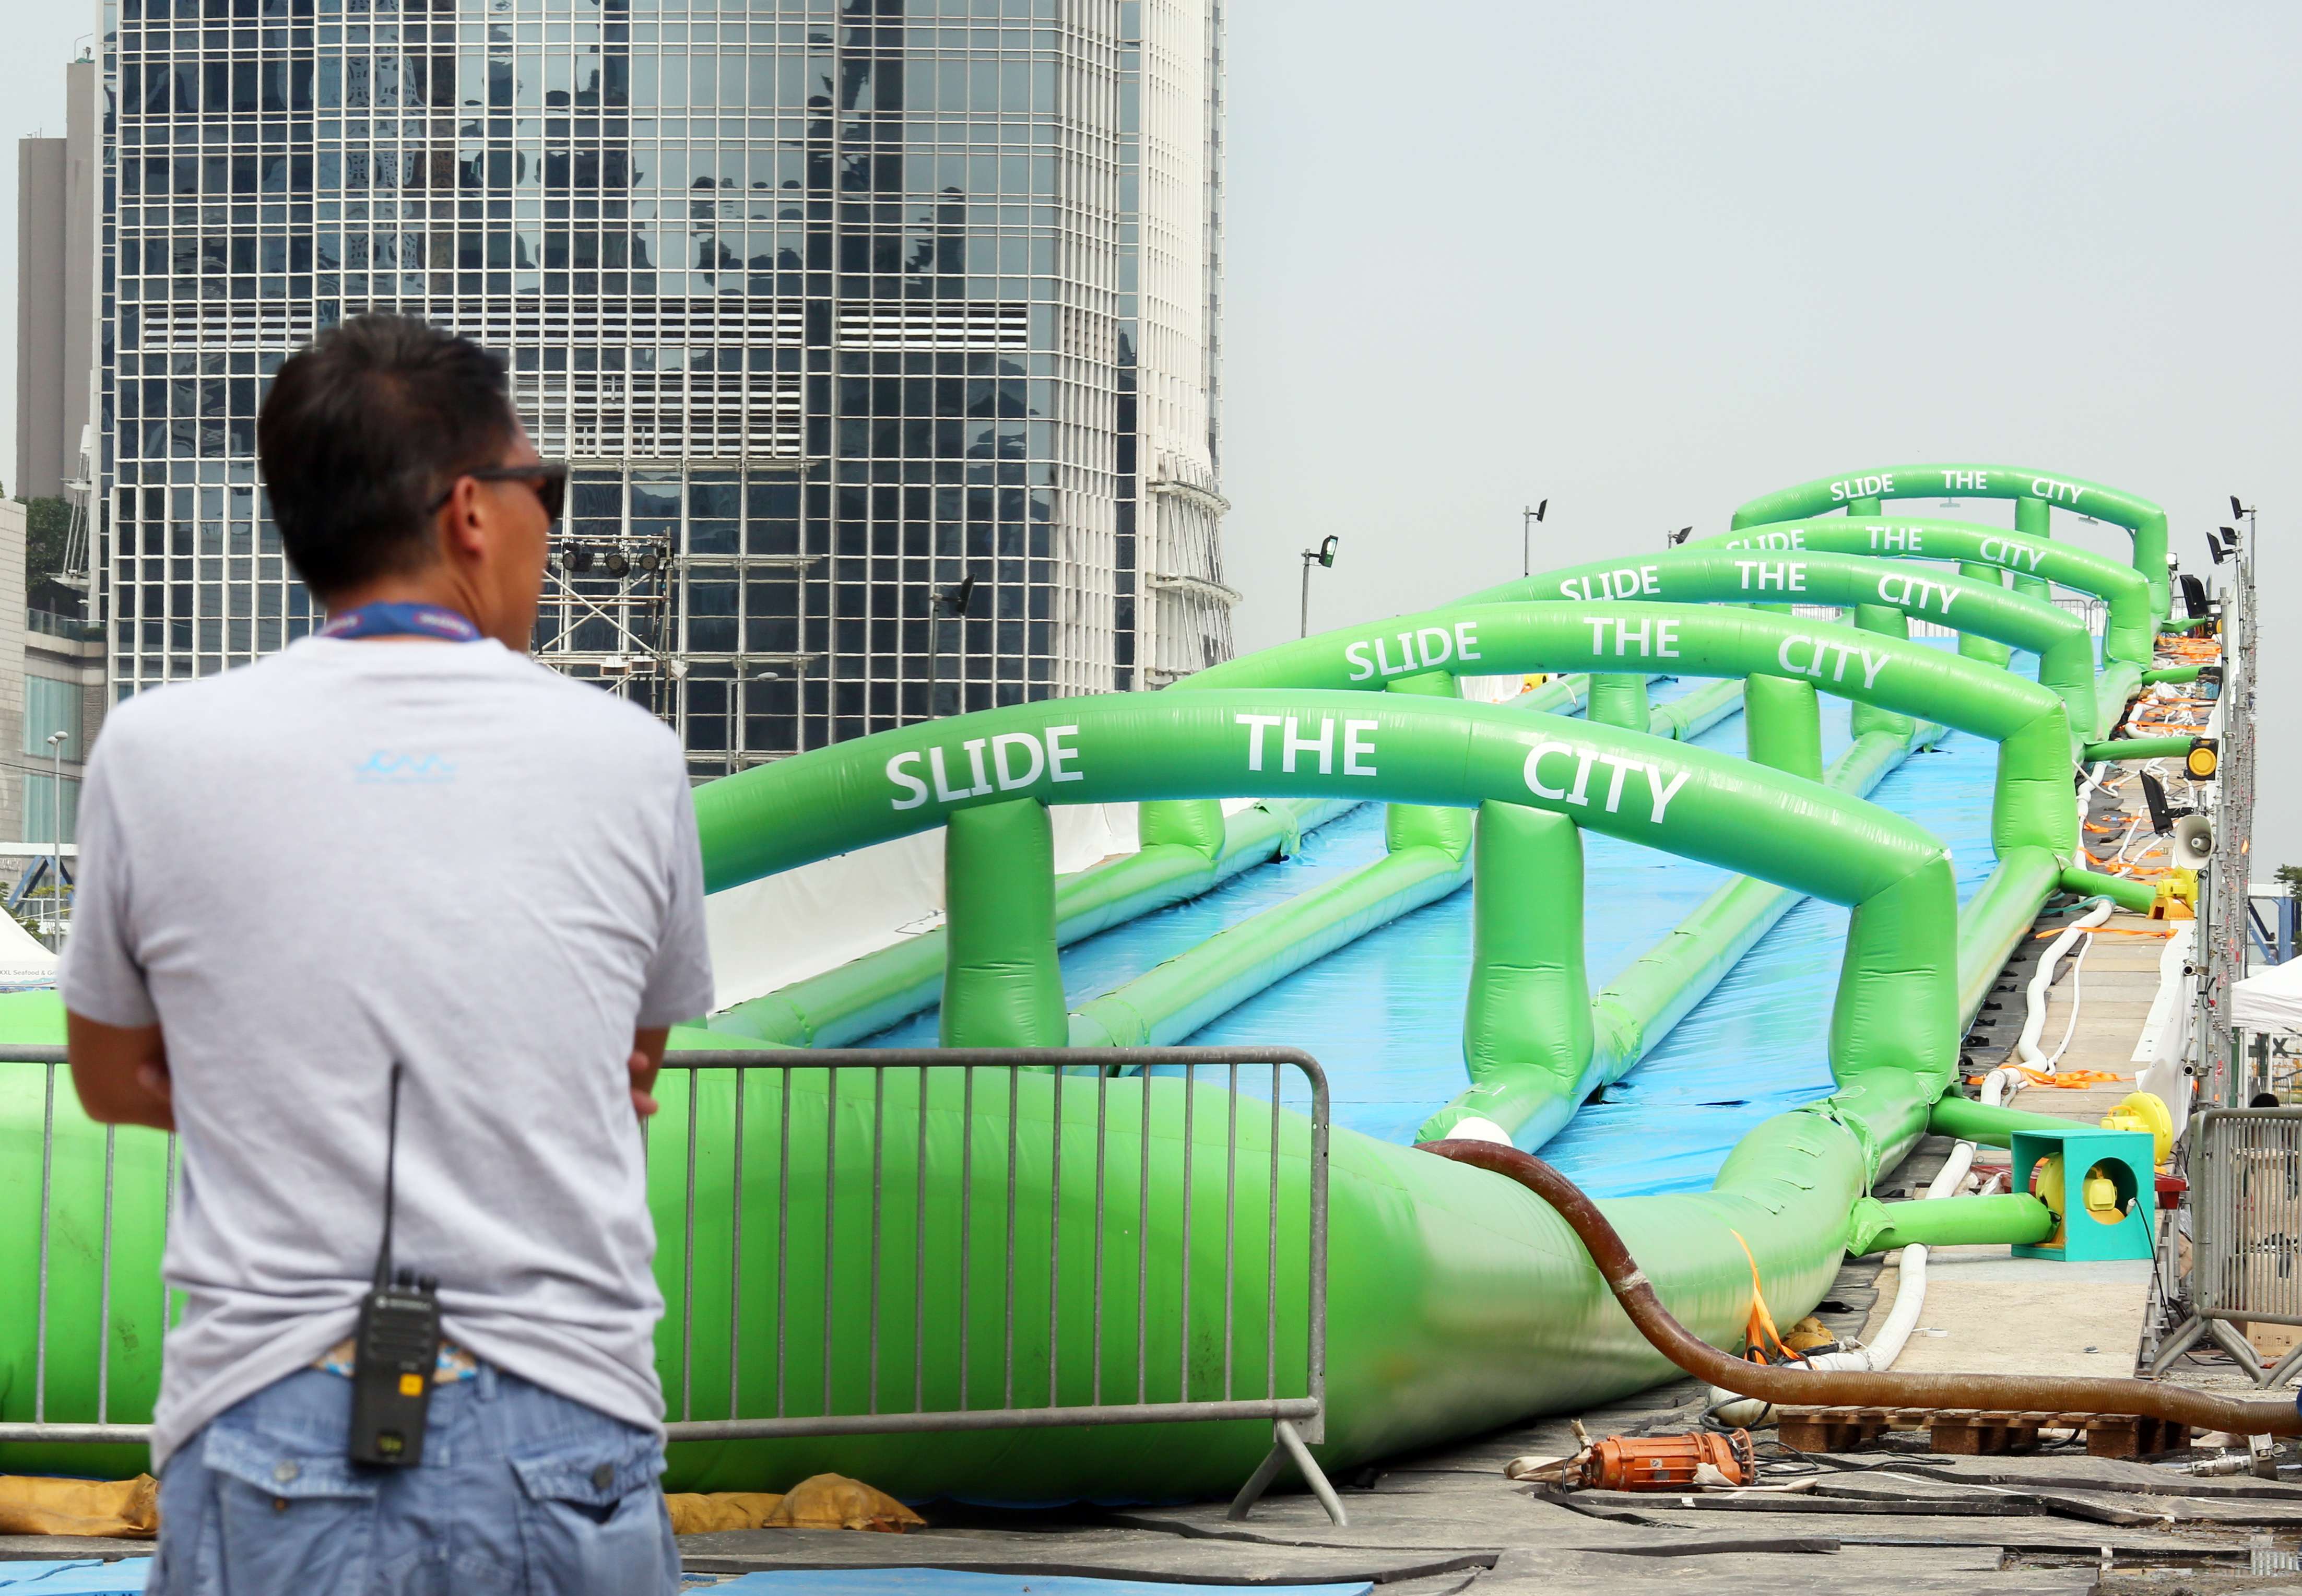 Slide the City in Central was kept shut on Wednesday morning, despite being scheduled to open at 9am. Photo: Nora Tam